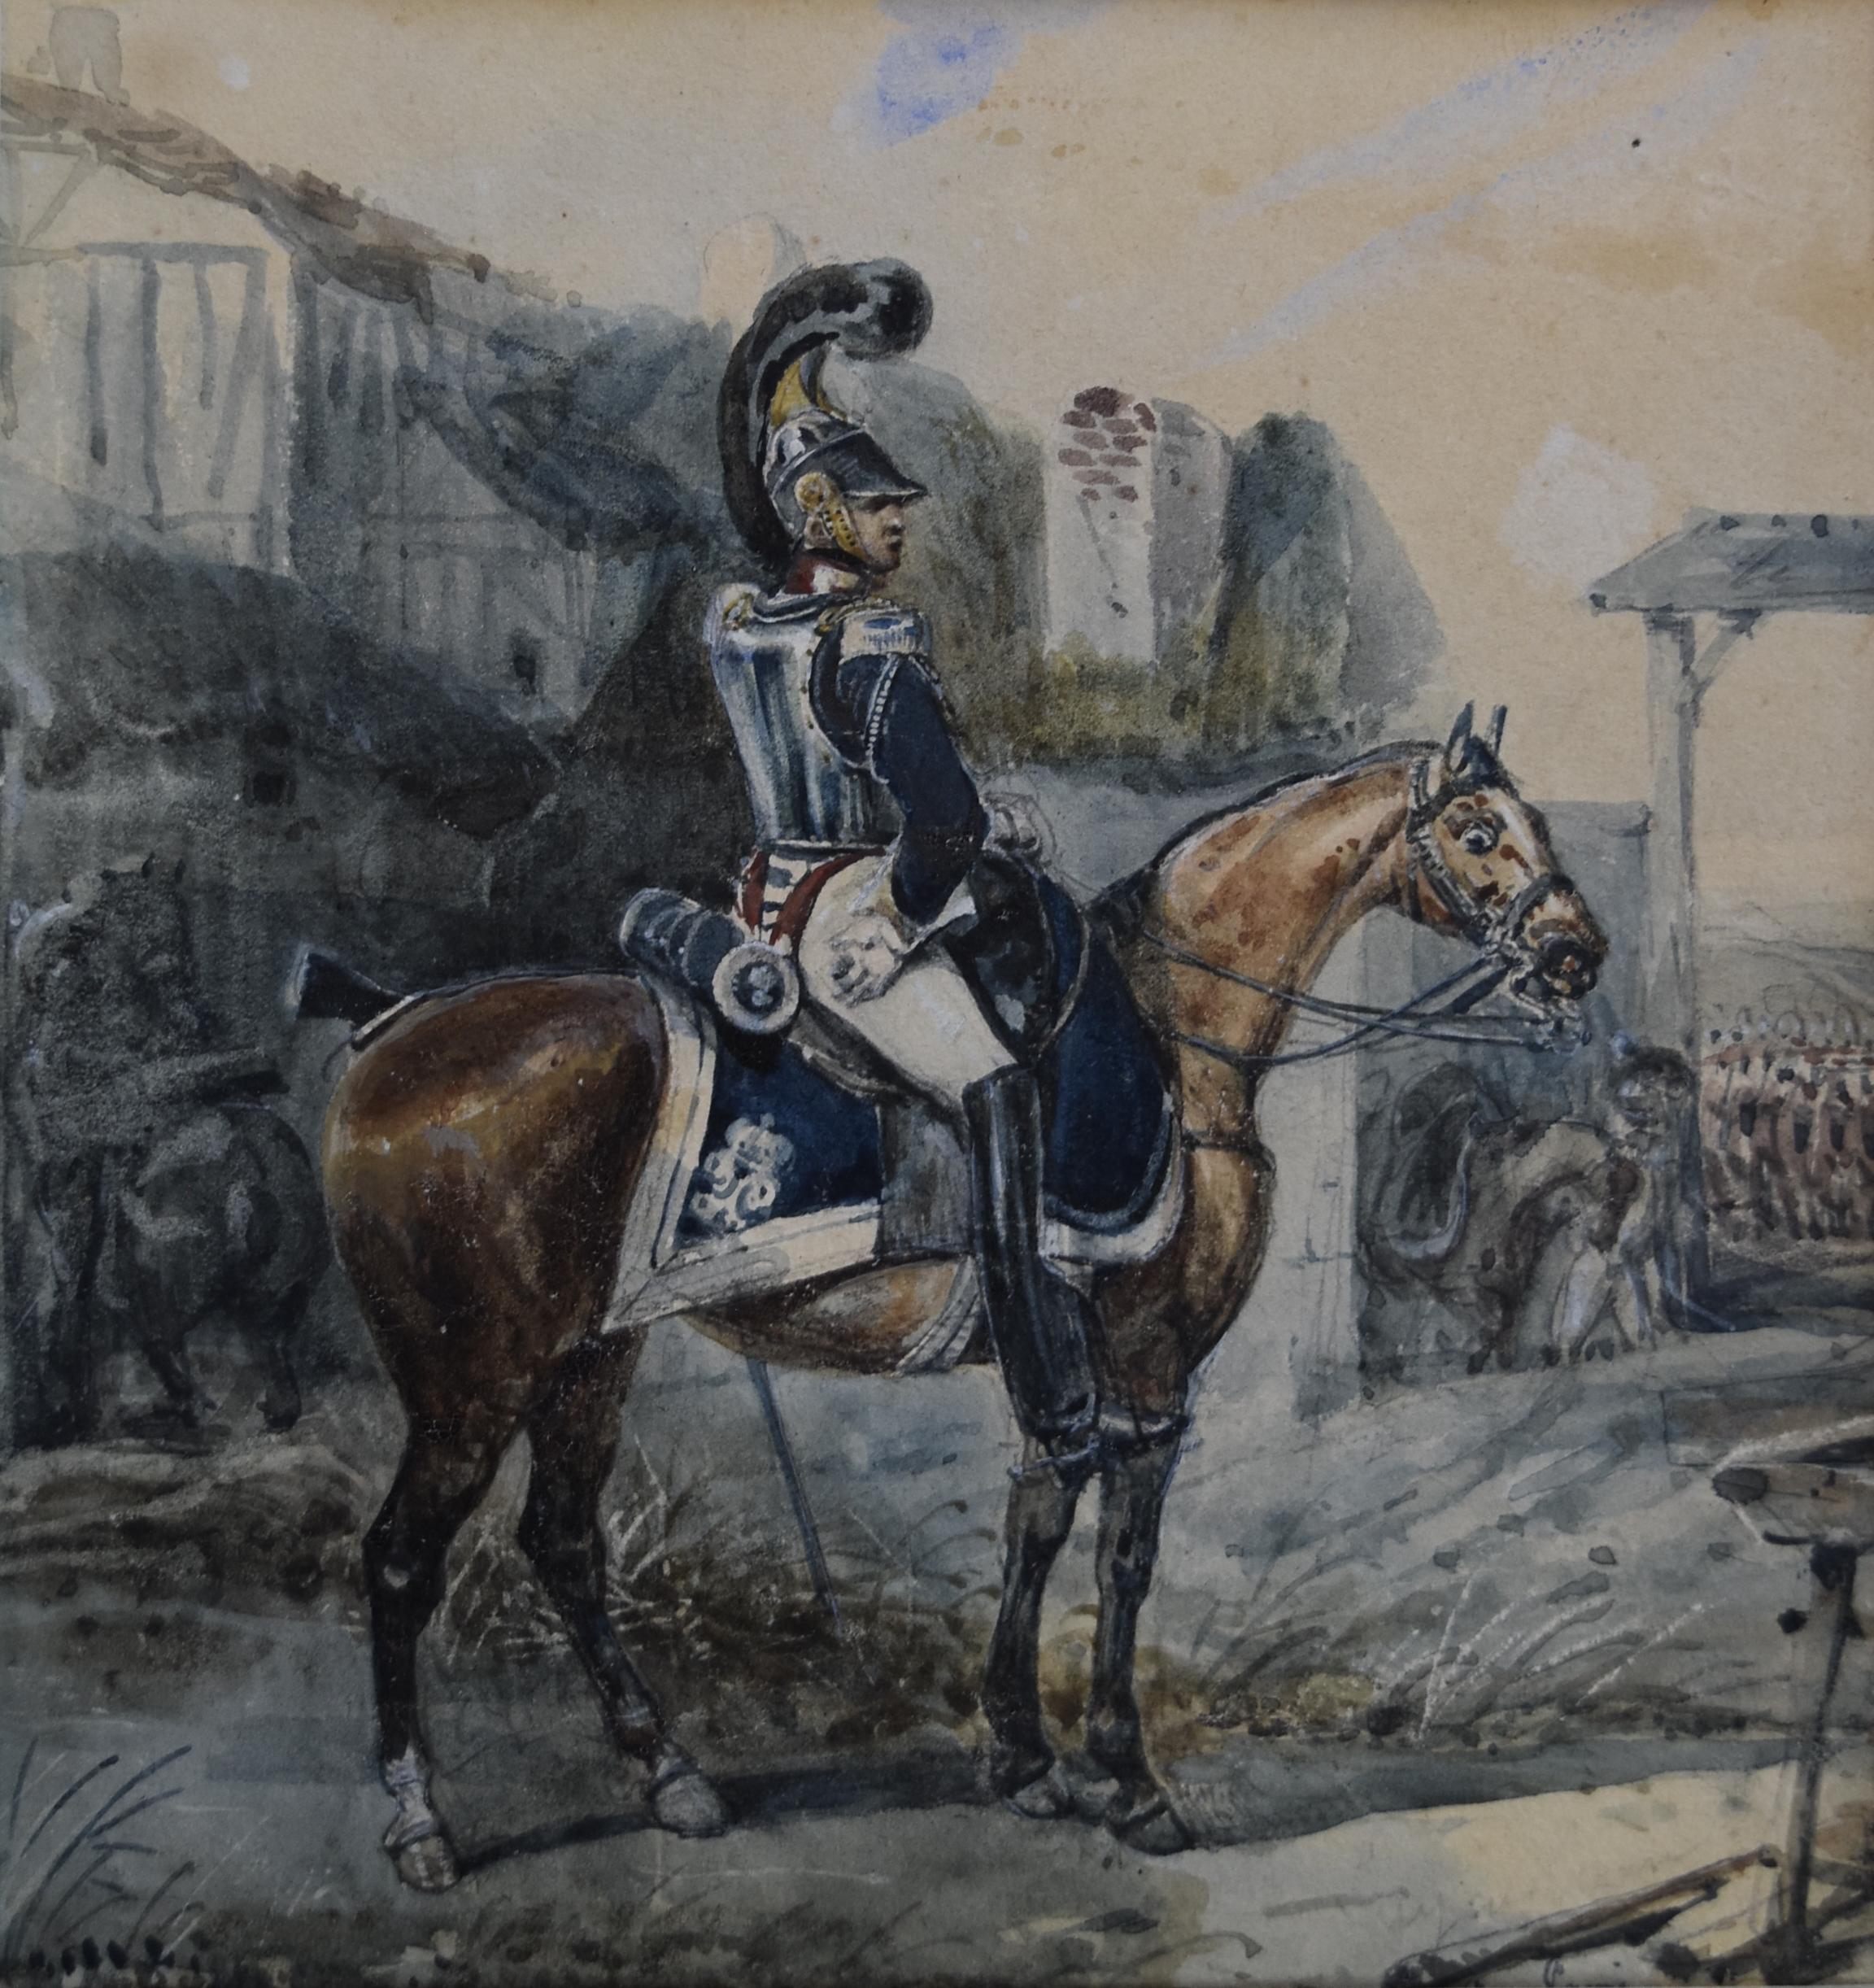 Unknown Portrait - Attributed to Eugene Lami, a Hussar on his horse, watercolor